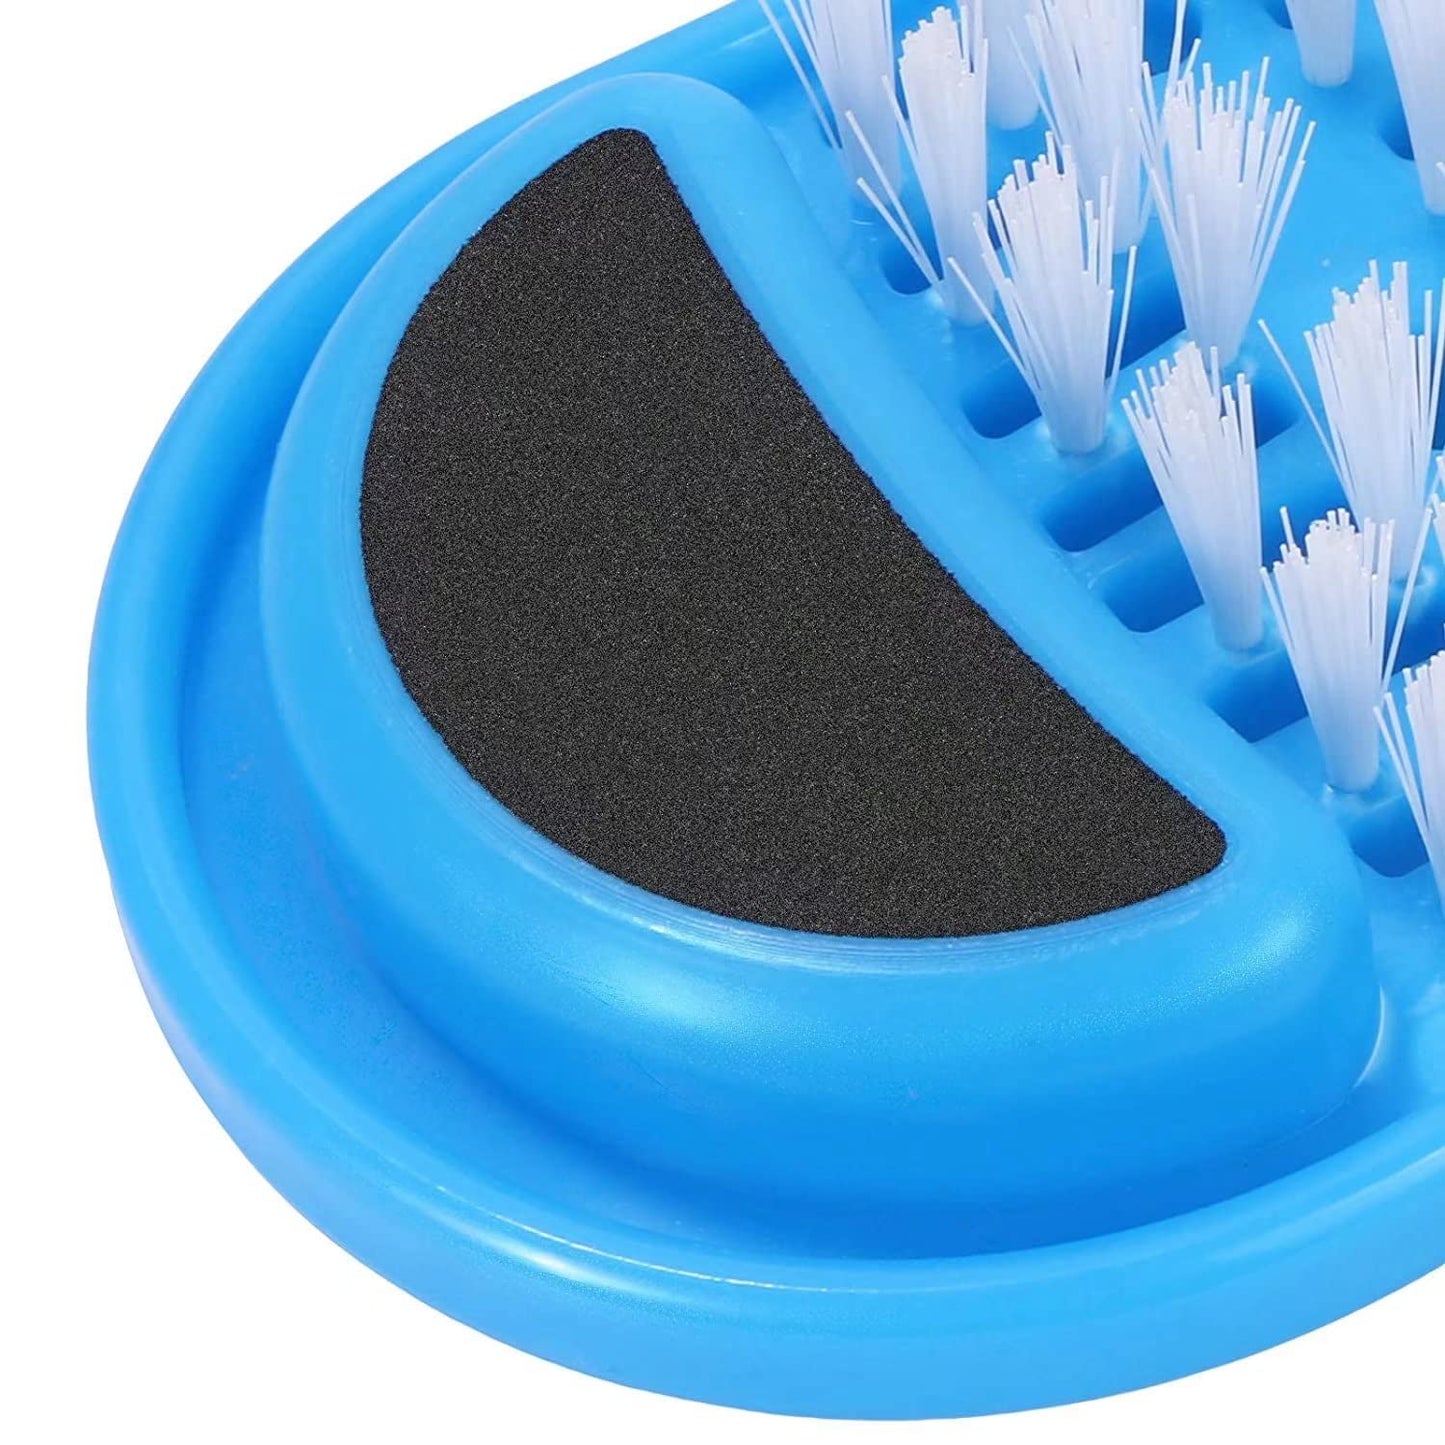 Magic Foot Scrubber Exfoliating Easy Feet Cleaning Brush Feet Washer Foot Shower Spa Massager Slippers for Unisex Adults